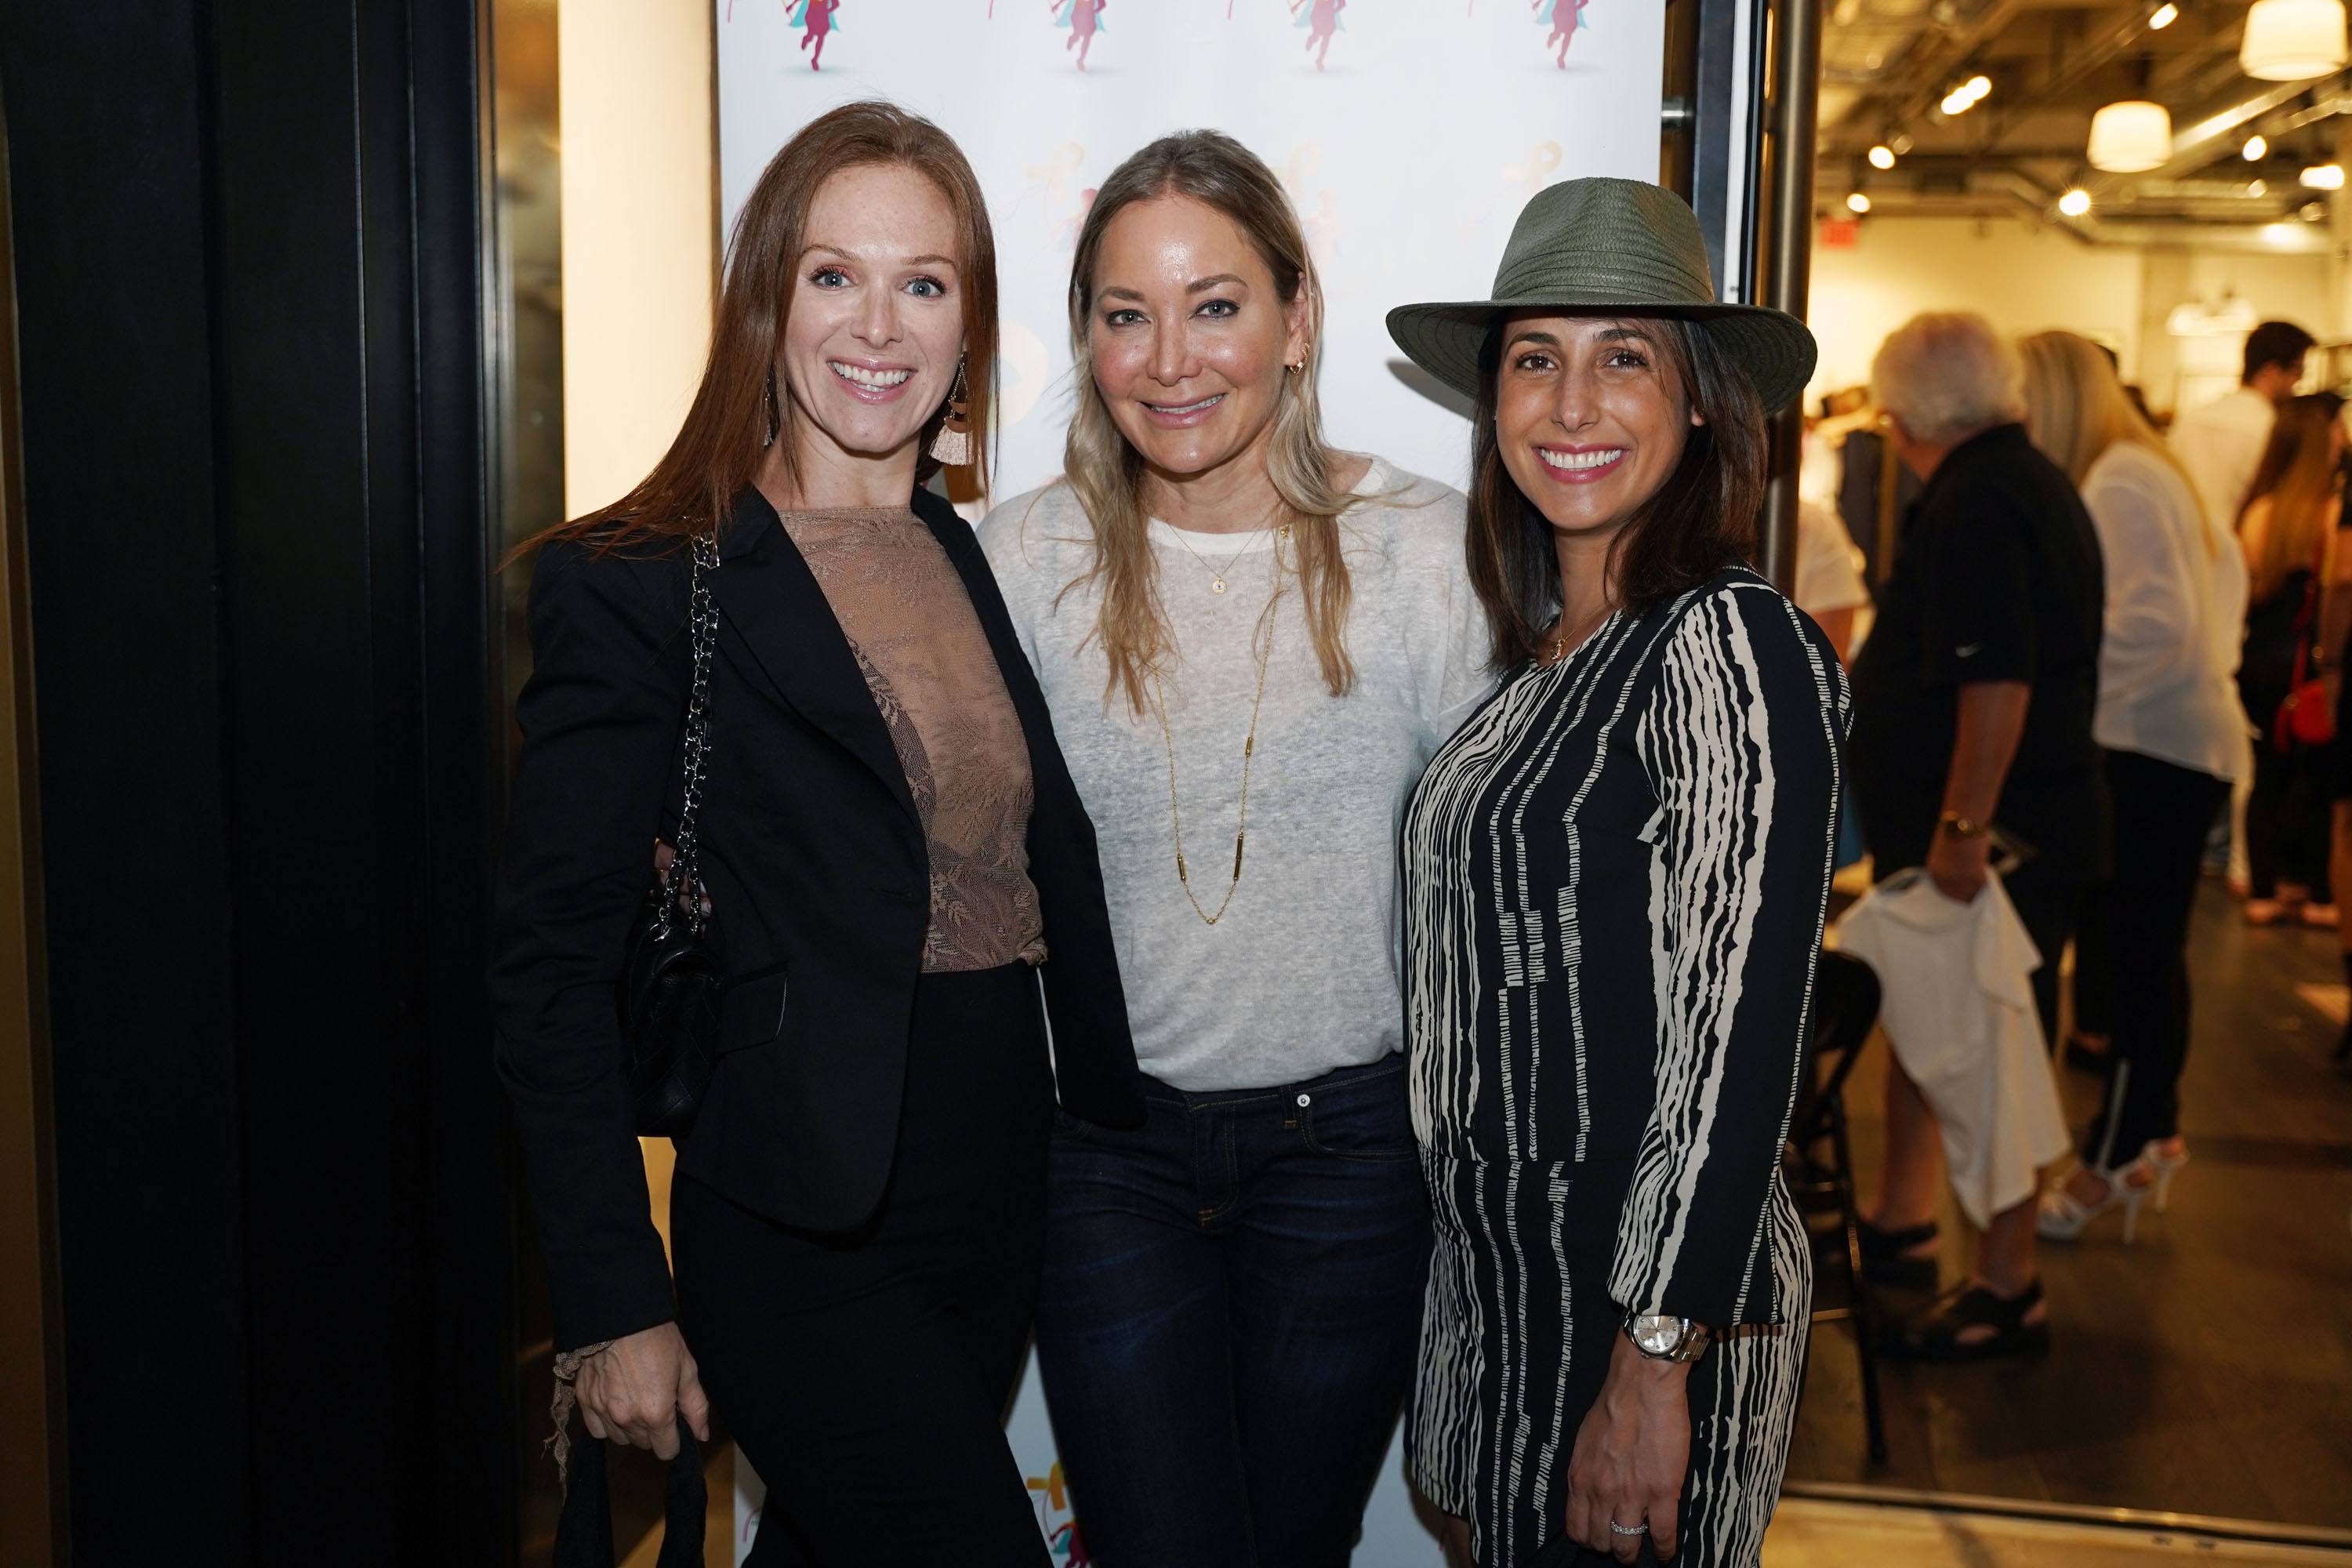 Guests at Rag & Bone Bal Harbour enjoying the fundraiser for The Childhood Cancer Project